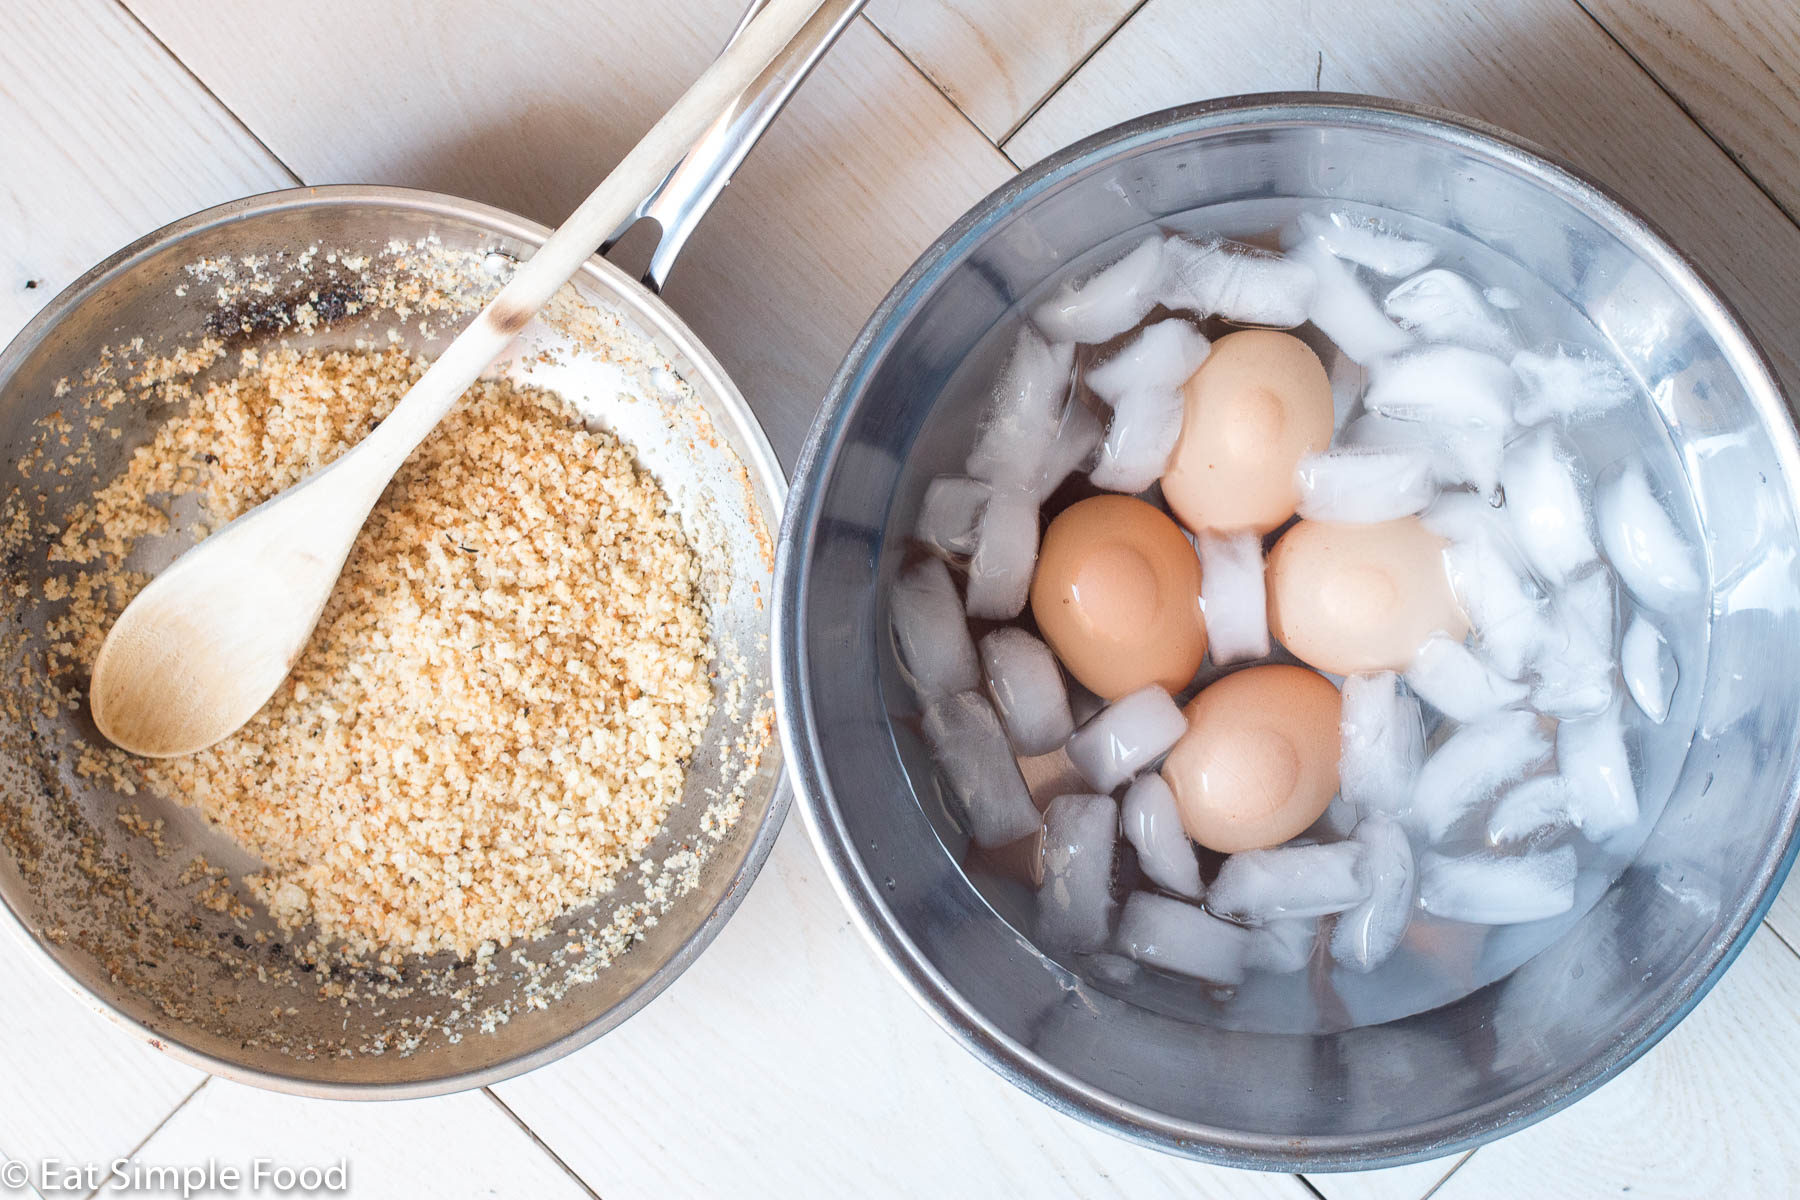 Small saucepan of lightly browned breadcrumbs and a small stainless steel bowl filled with 4 eggs and ice water.